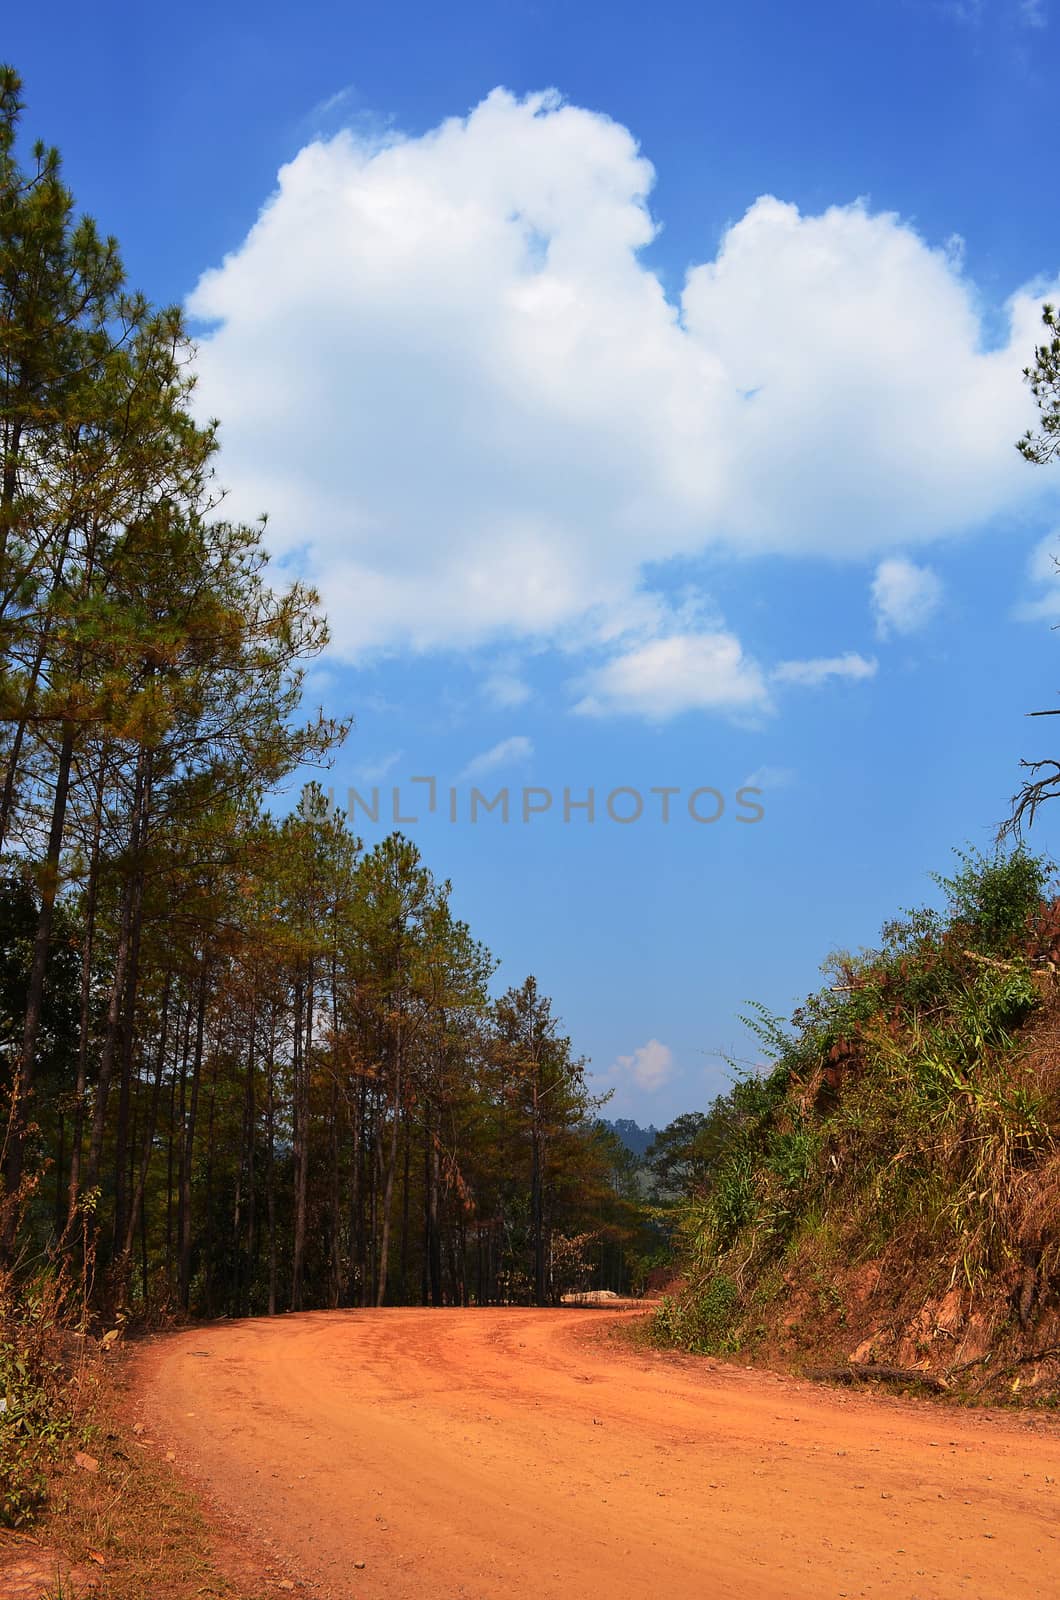 A Non-Asphalt Paved Road with Pine Forest and Cloudy Blue Sky